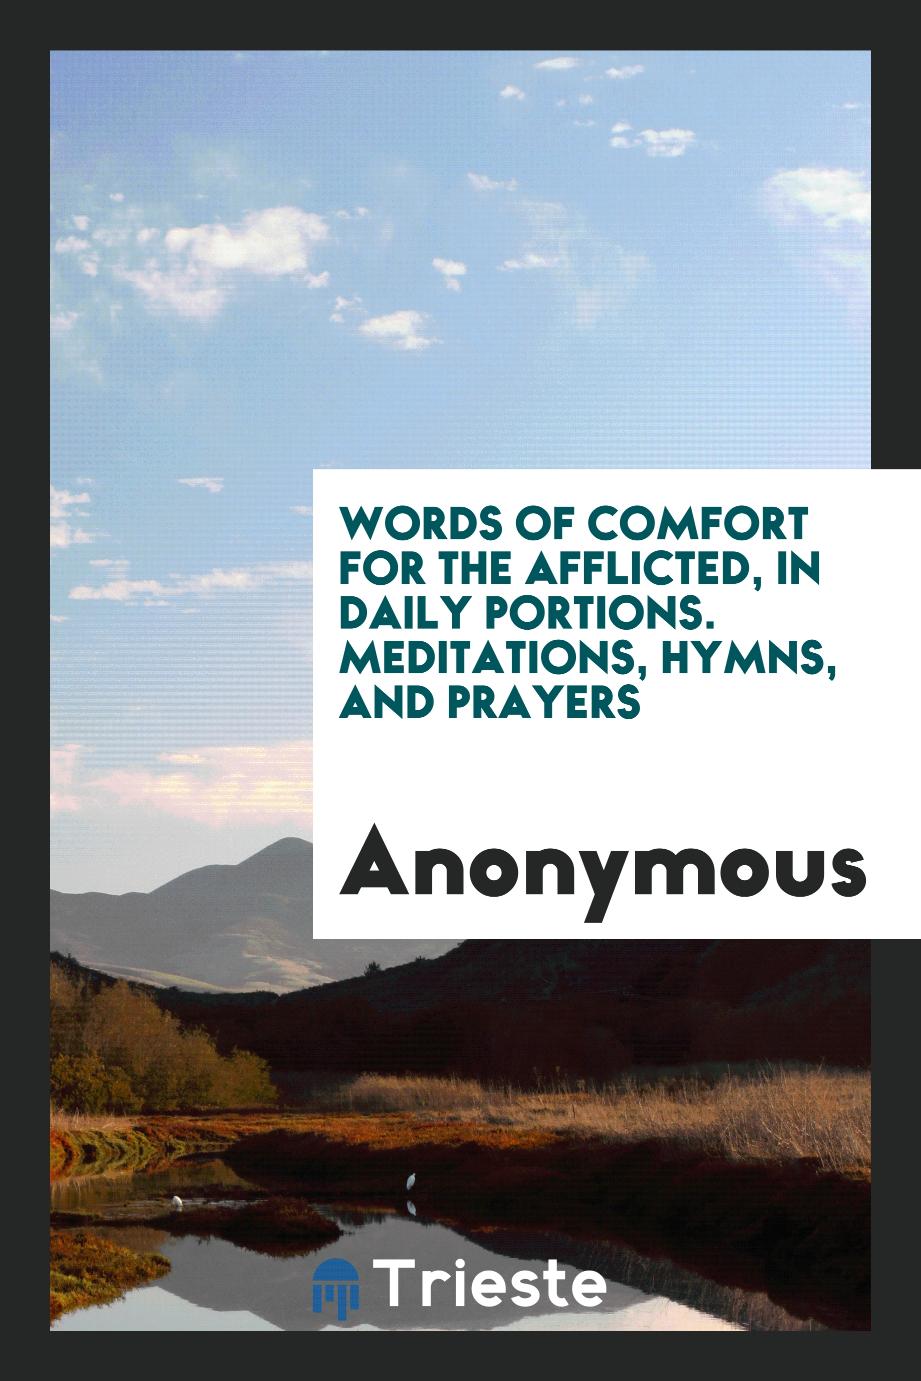 Words of Comfort for the Afflicted, in Daily Portions. Meditations, Hymns, and Prayers